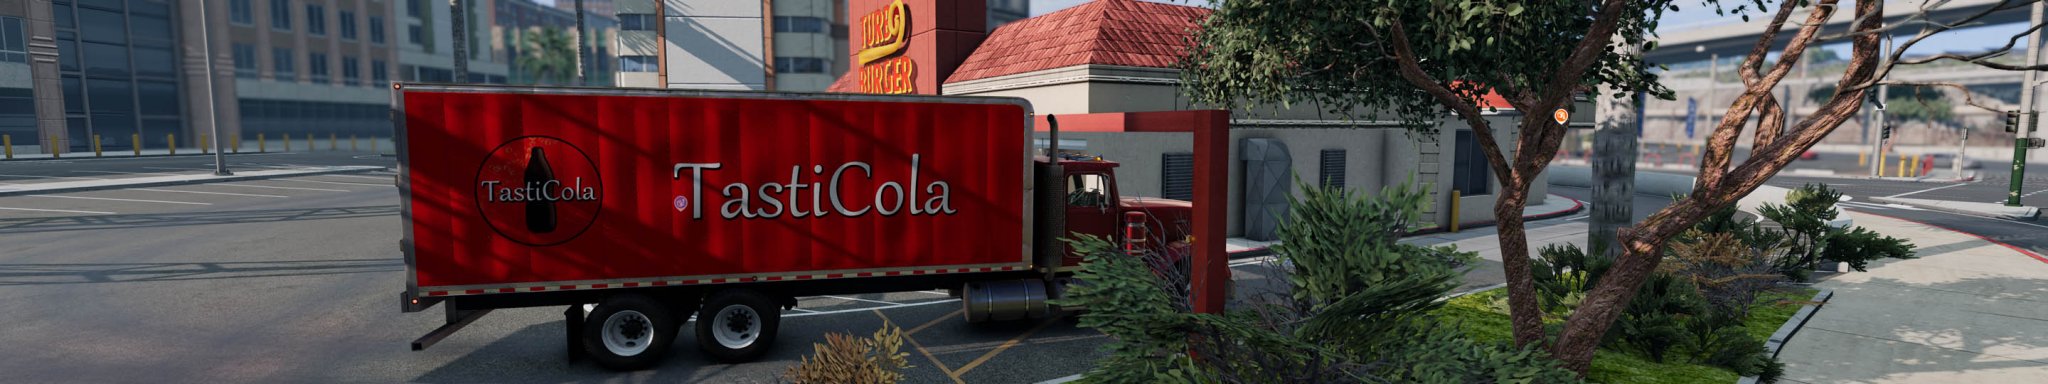 0 BeamNG Career Mode TURBO BURGER TRUCK Delivery copy.jpg